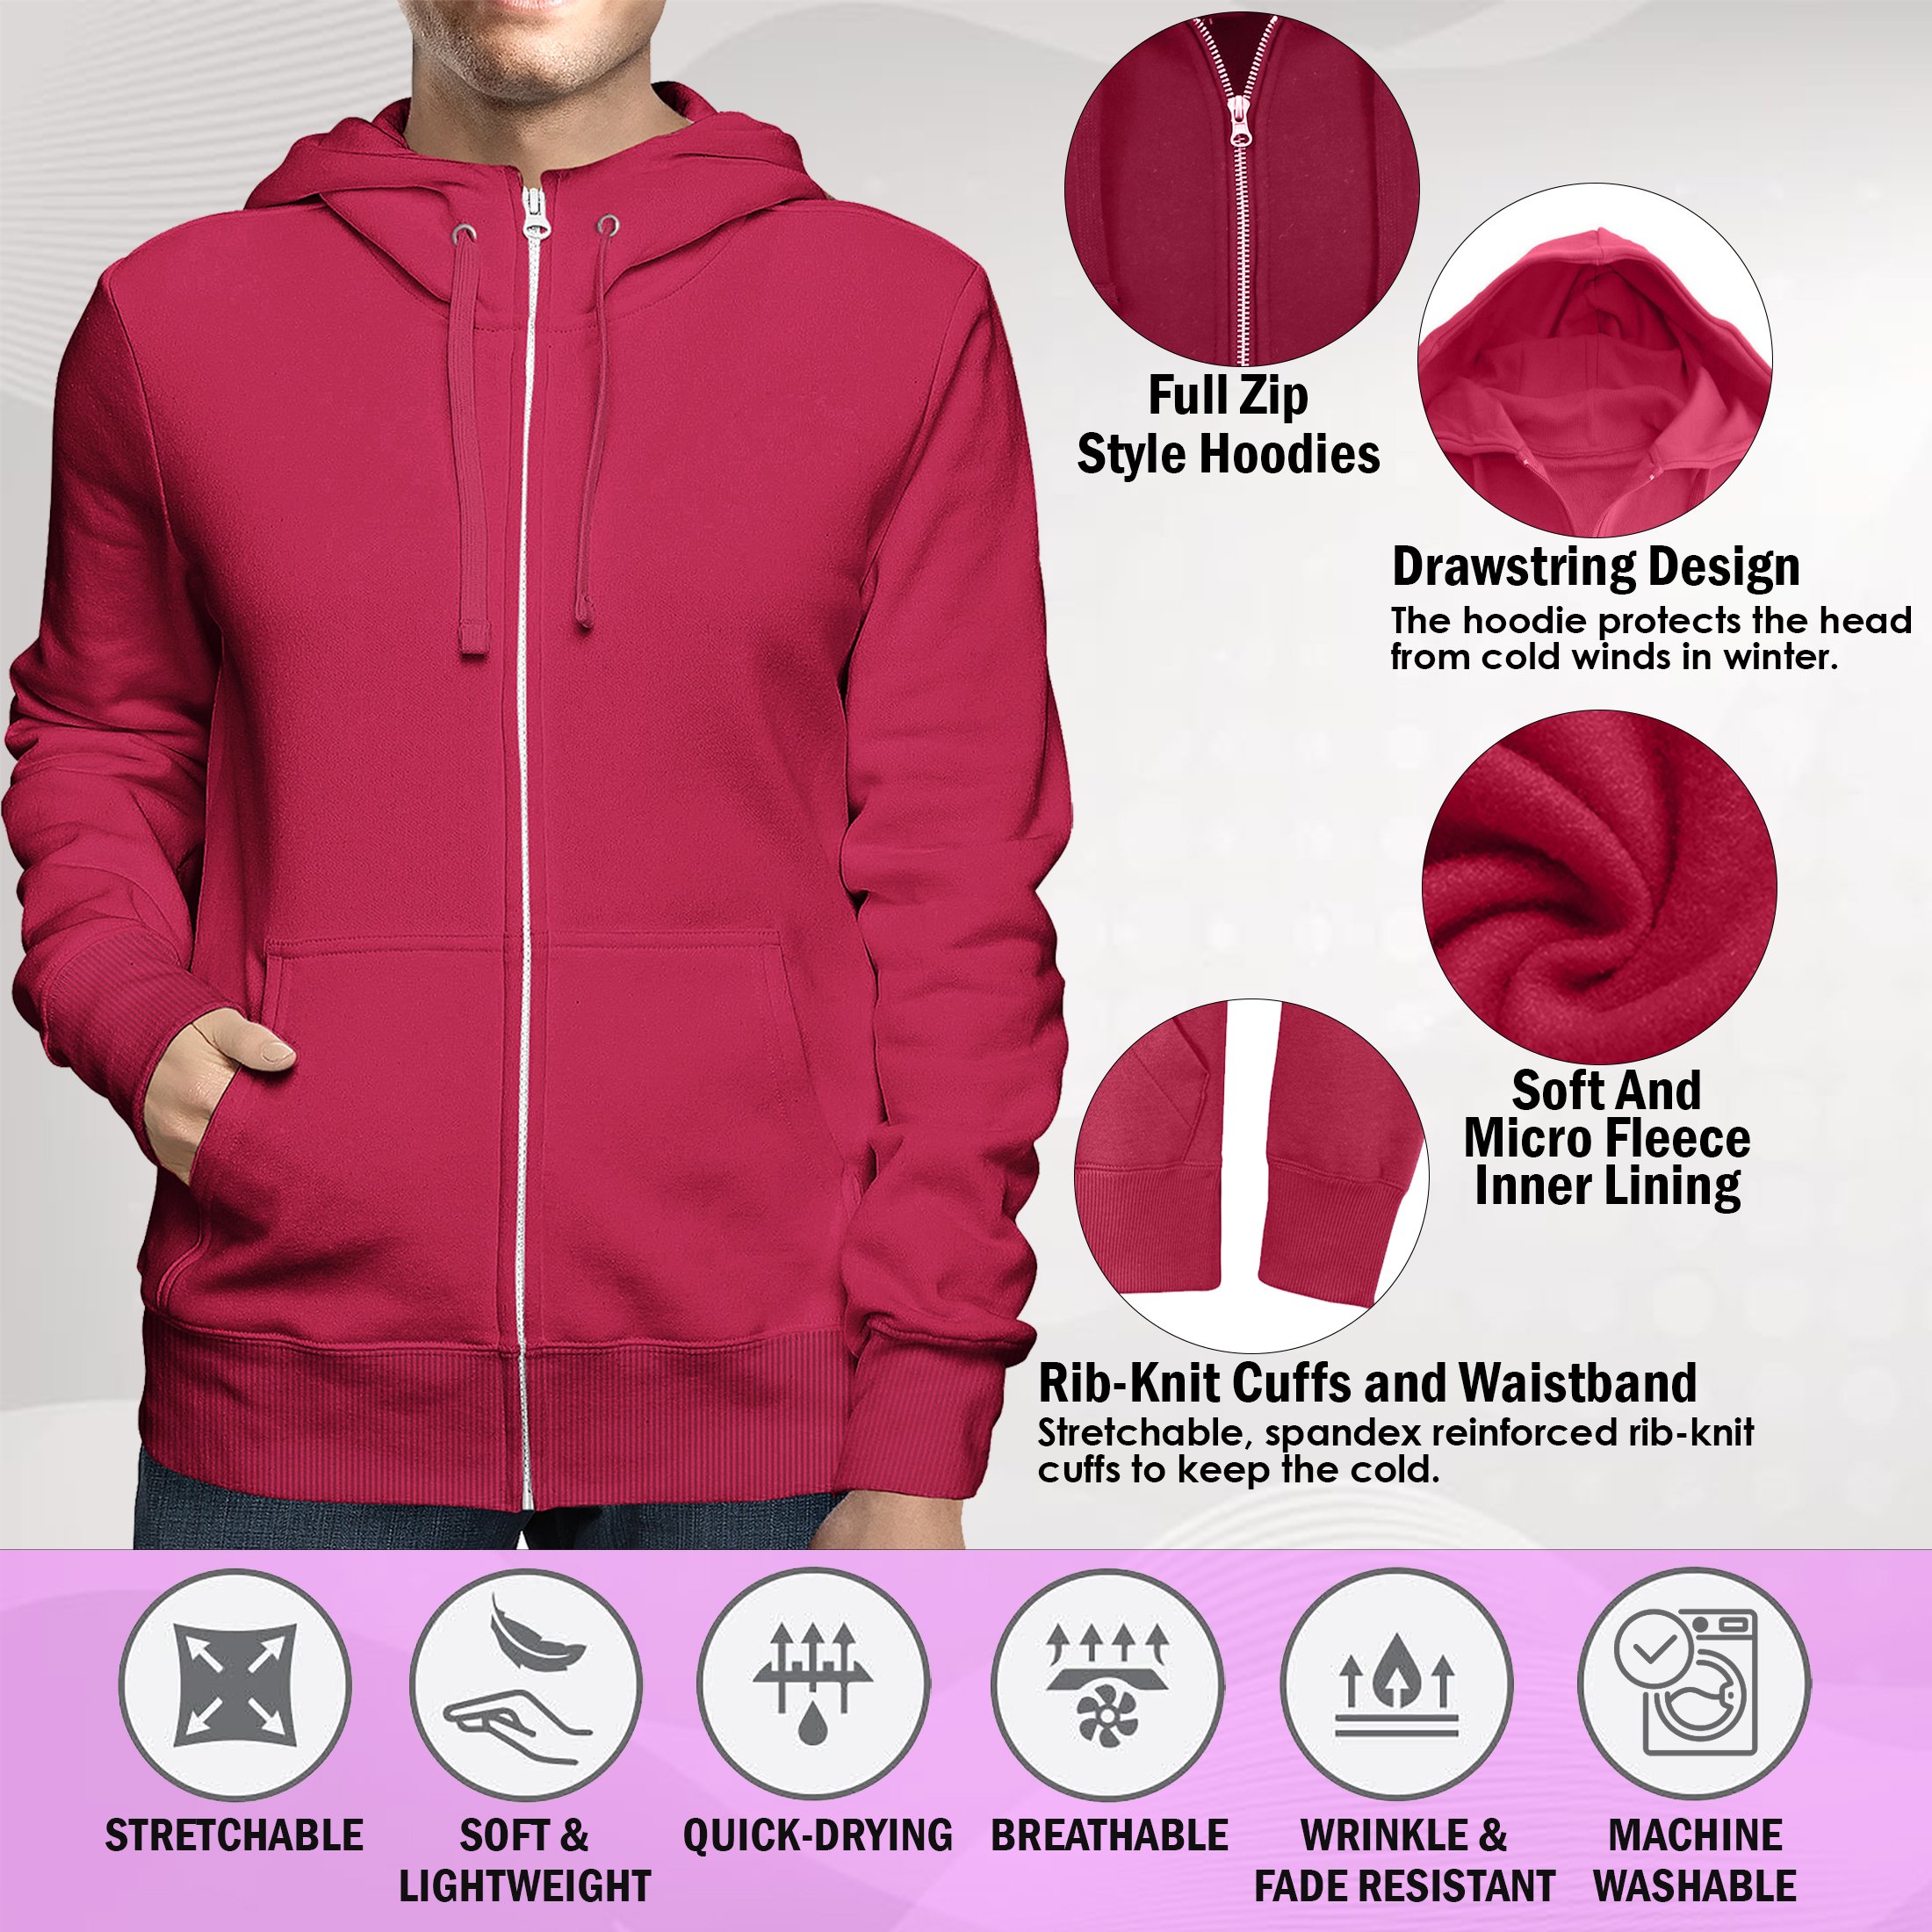 2-Pack: Men's Full Zip Up Fleece-Lined Hoodie Sweatshirt (Big & Tall Size Available) - Burgundy & Olive, 3x-large